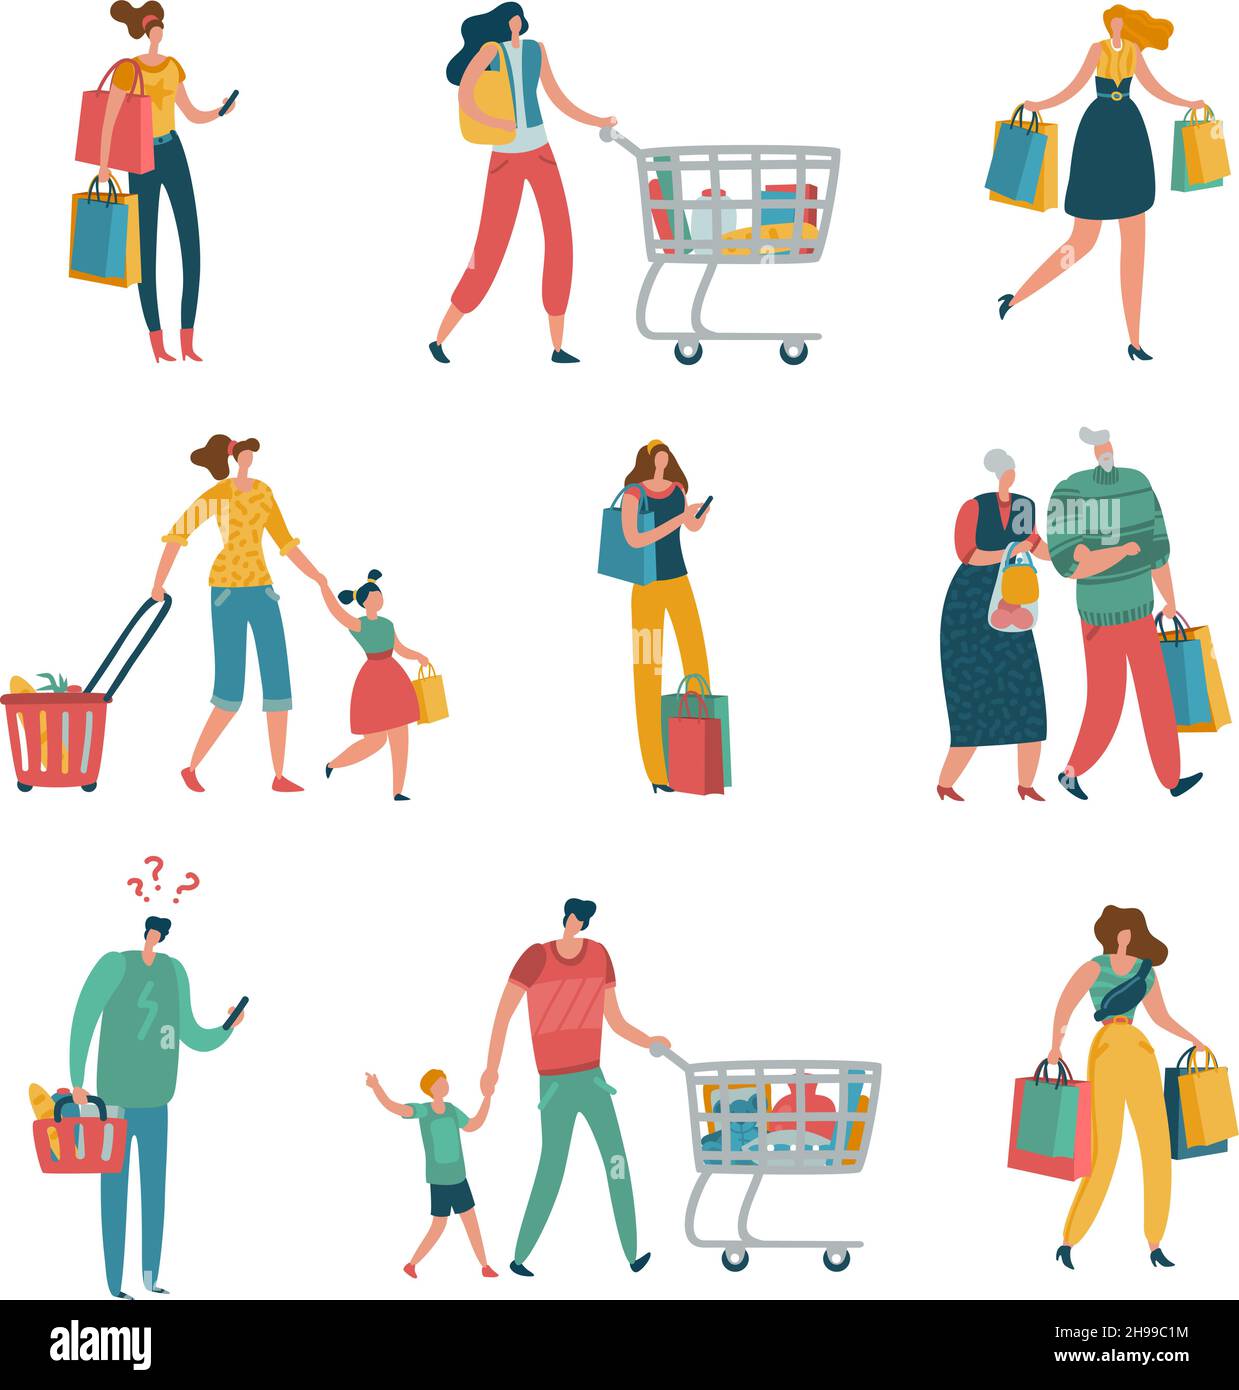 Shopping people. Persons shop family basket cart consume retail purchase store shopaholic mall supermarket shopper flat Stock Vector